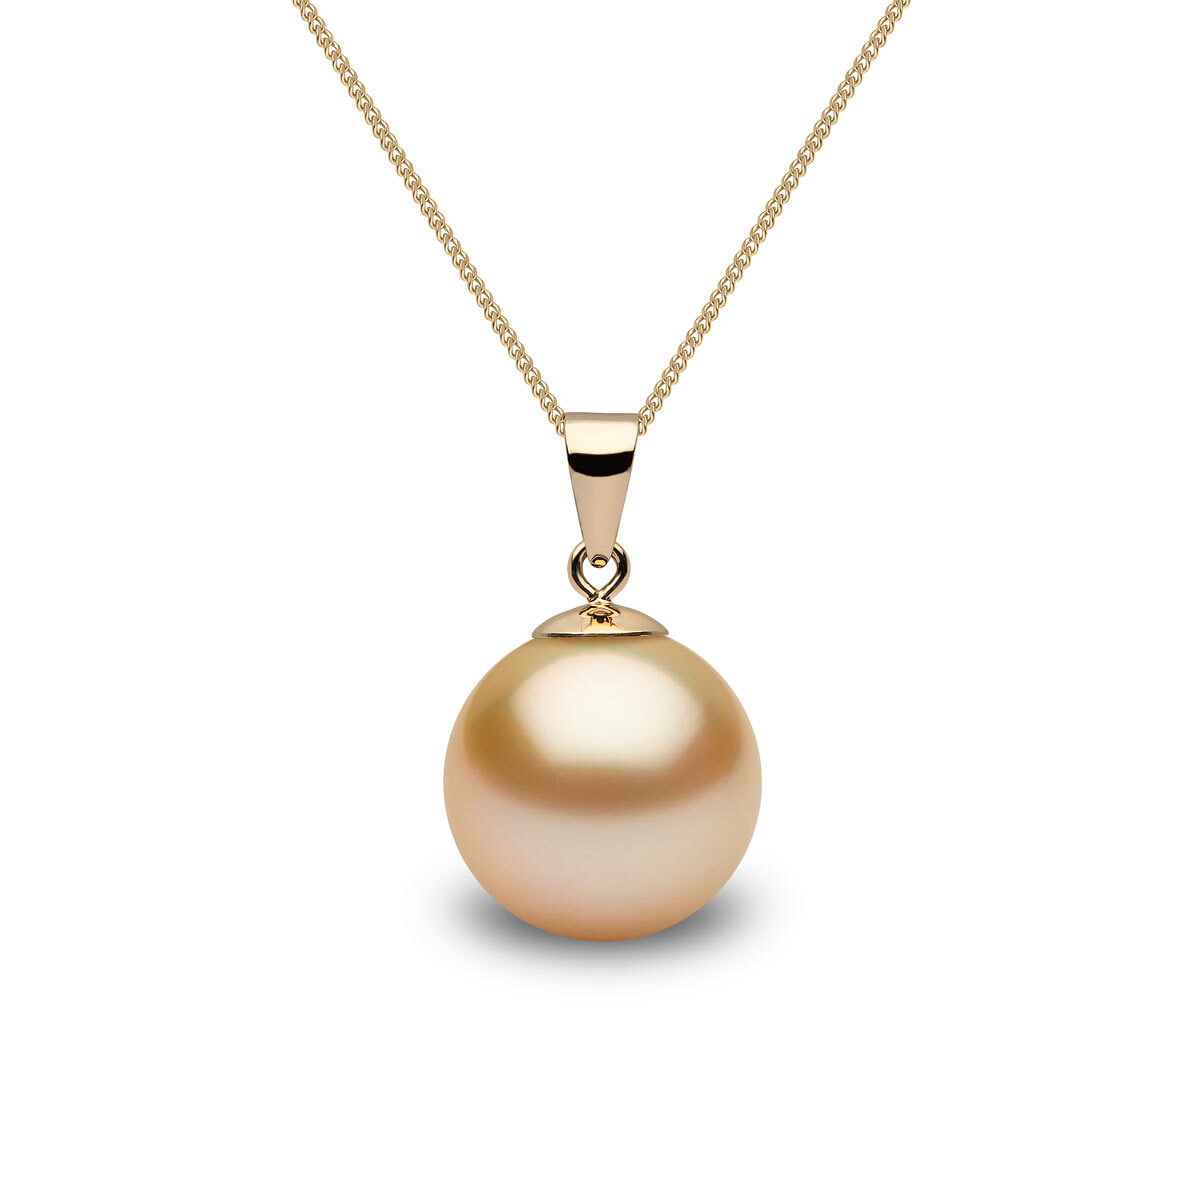 Gold South Sea Pendant, 18 ct Yellow Gold